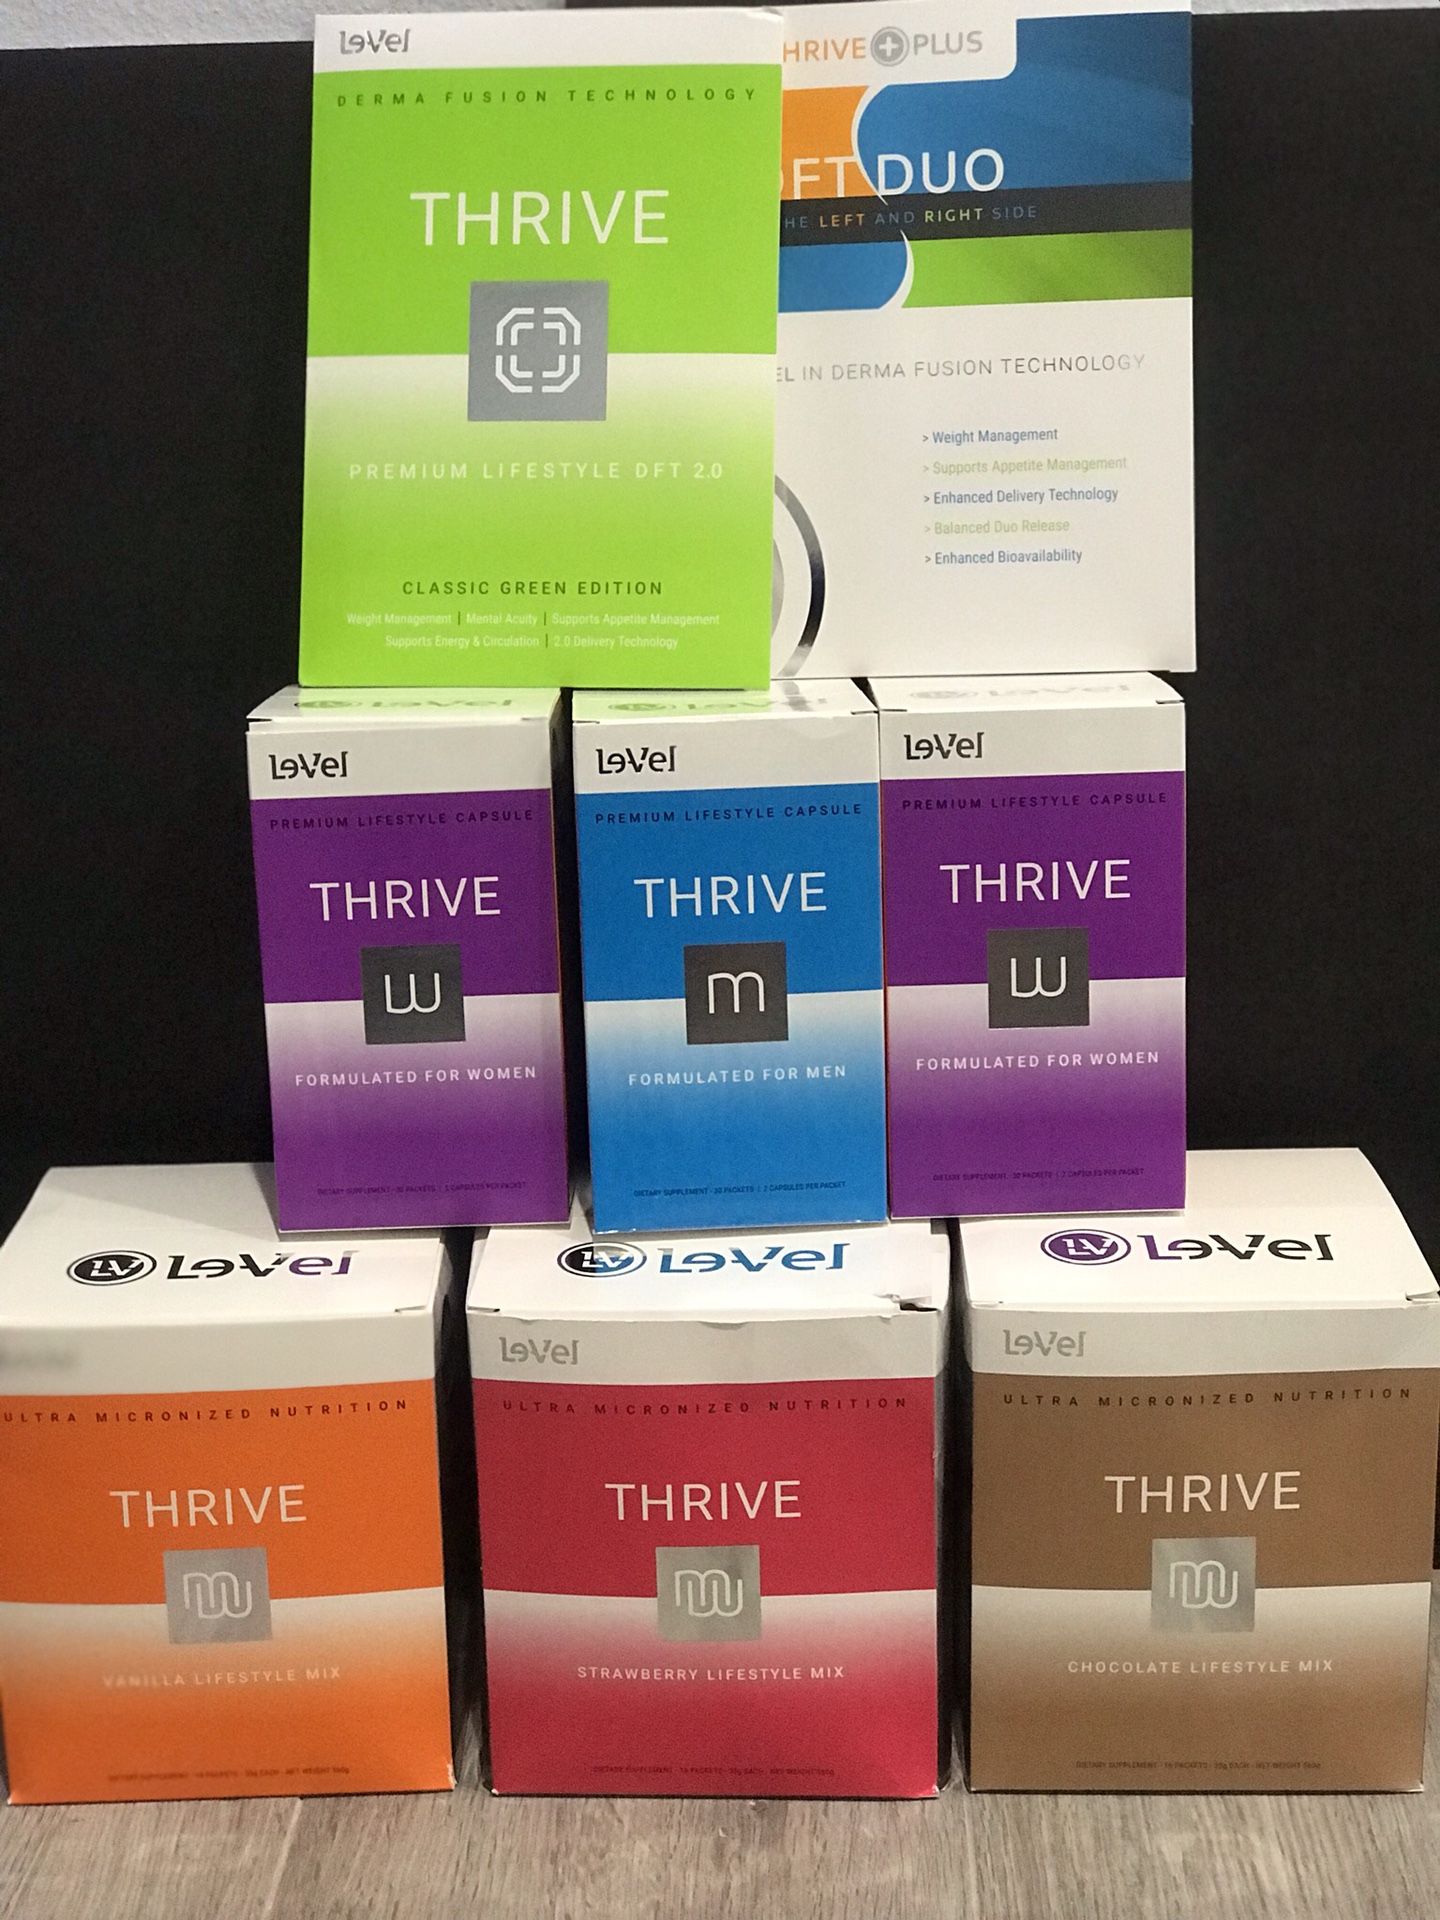 Le-vel - Thrive Experience/Thrive Skin (Need Energy, Gut health, Boost in Mood, Clear Mind, Weight Loss?)